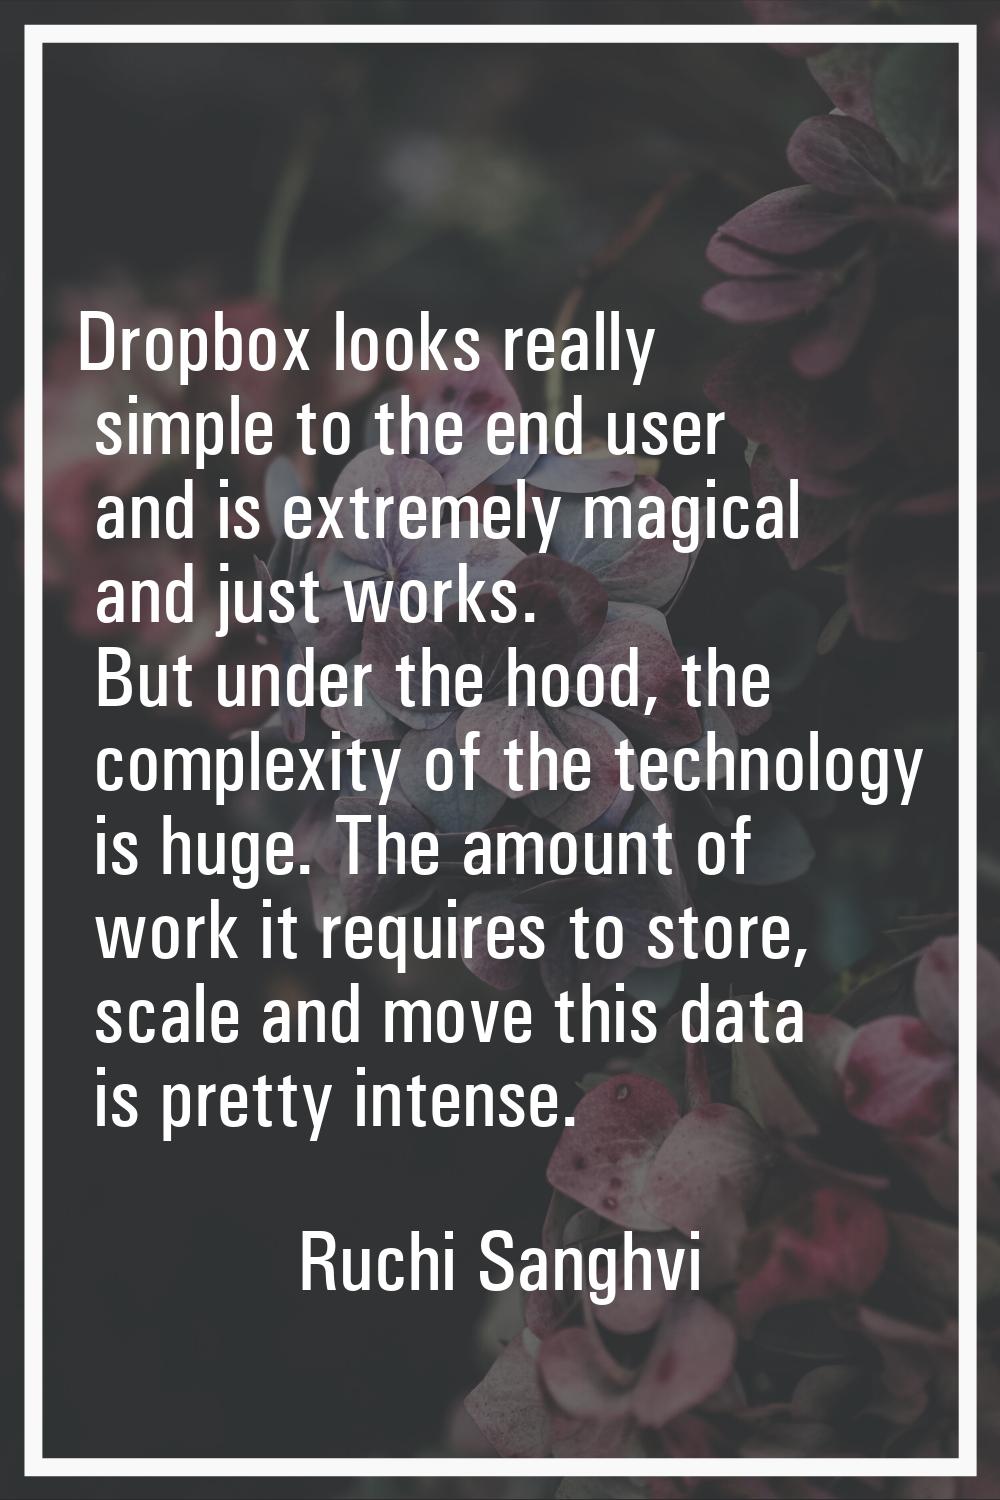 Dropbox looks really simple to the end user and is extremely magical and just works. But under the 